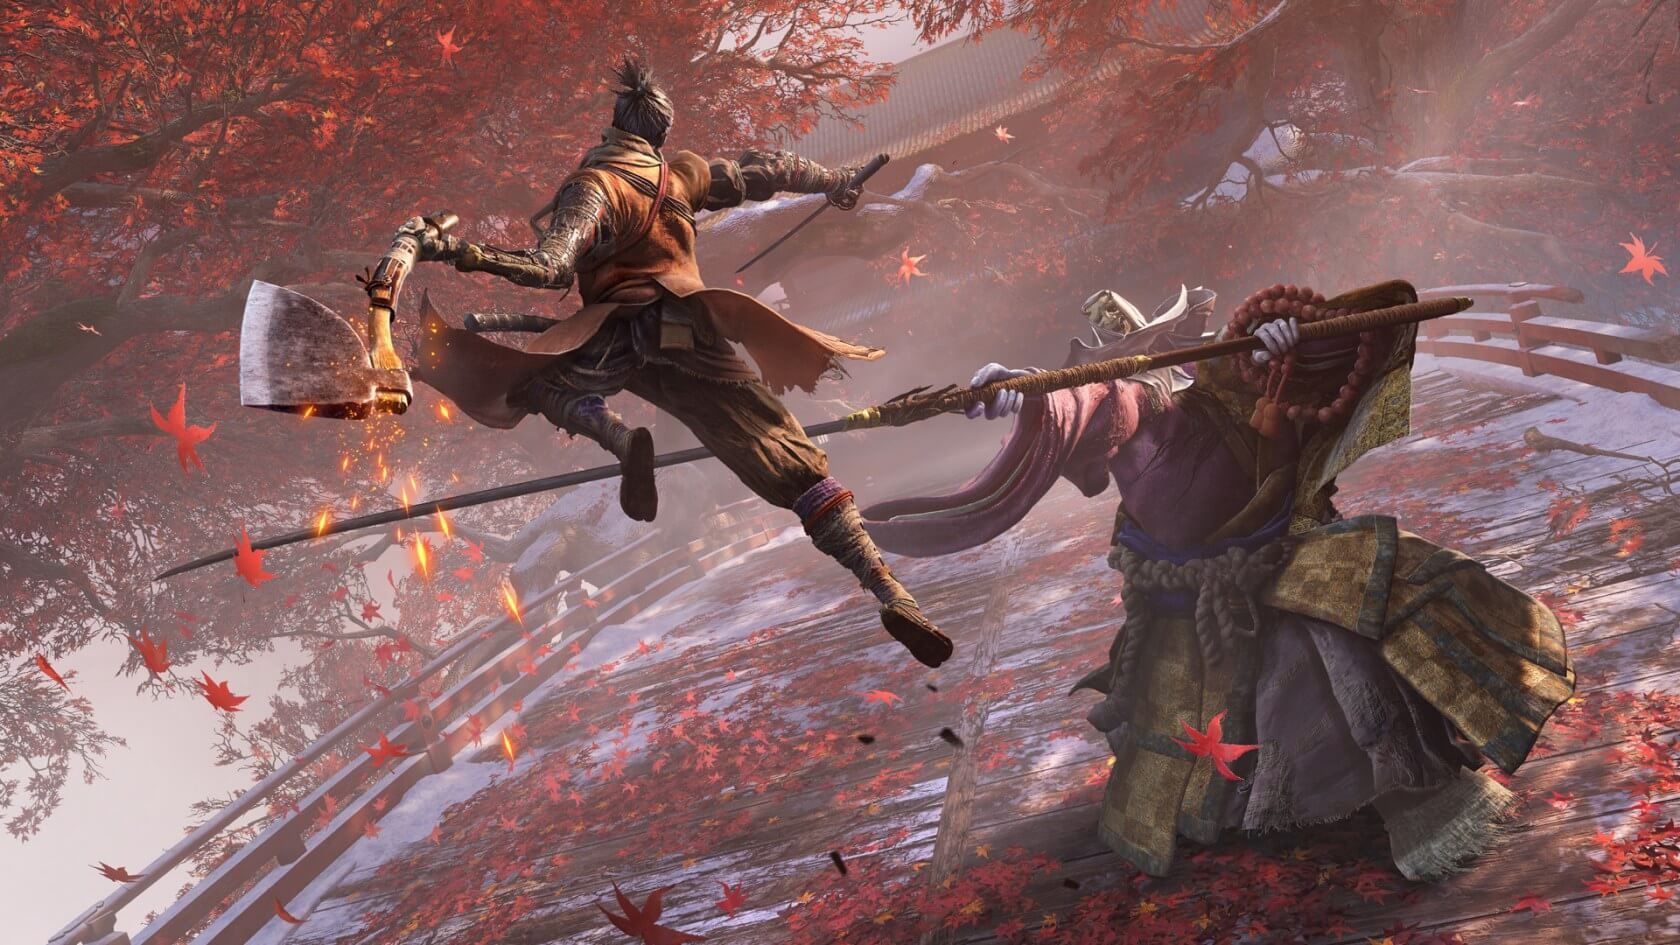 Sekiro: Shadows Die Twice takes the Game of the Year award for 2019